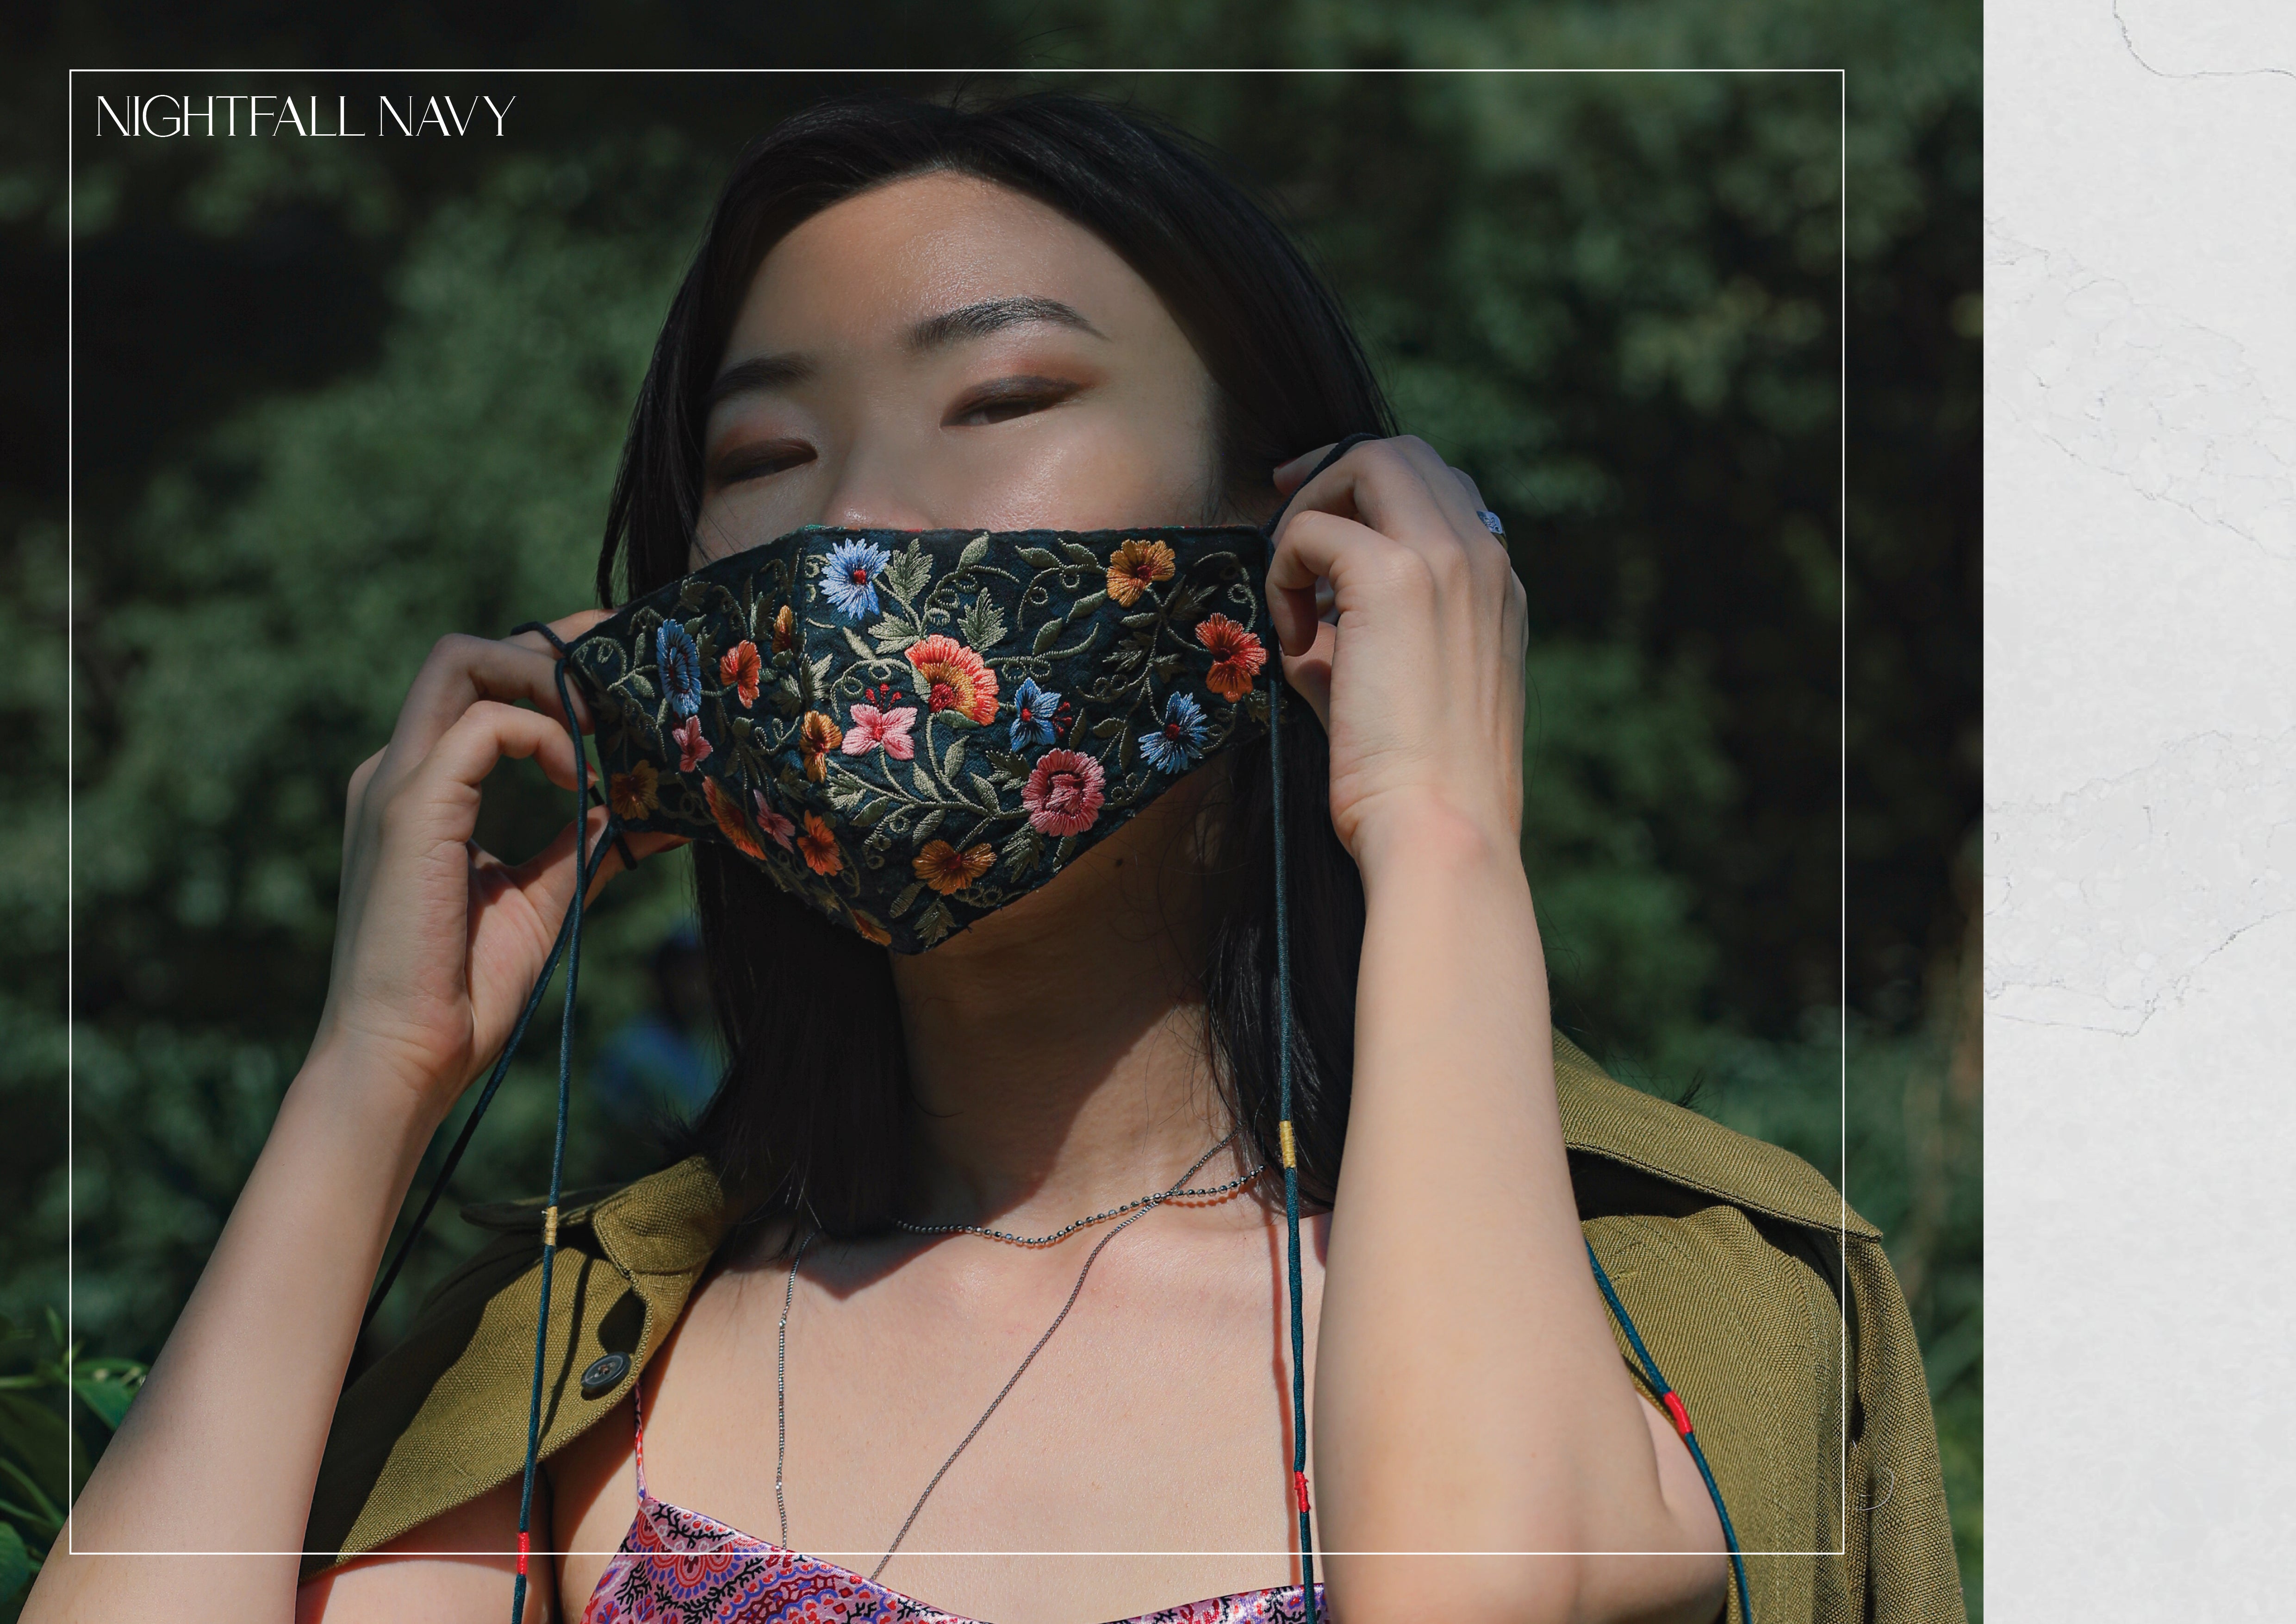 Handcrafted Fashionable Face Mask/Covering by Namaskaya